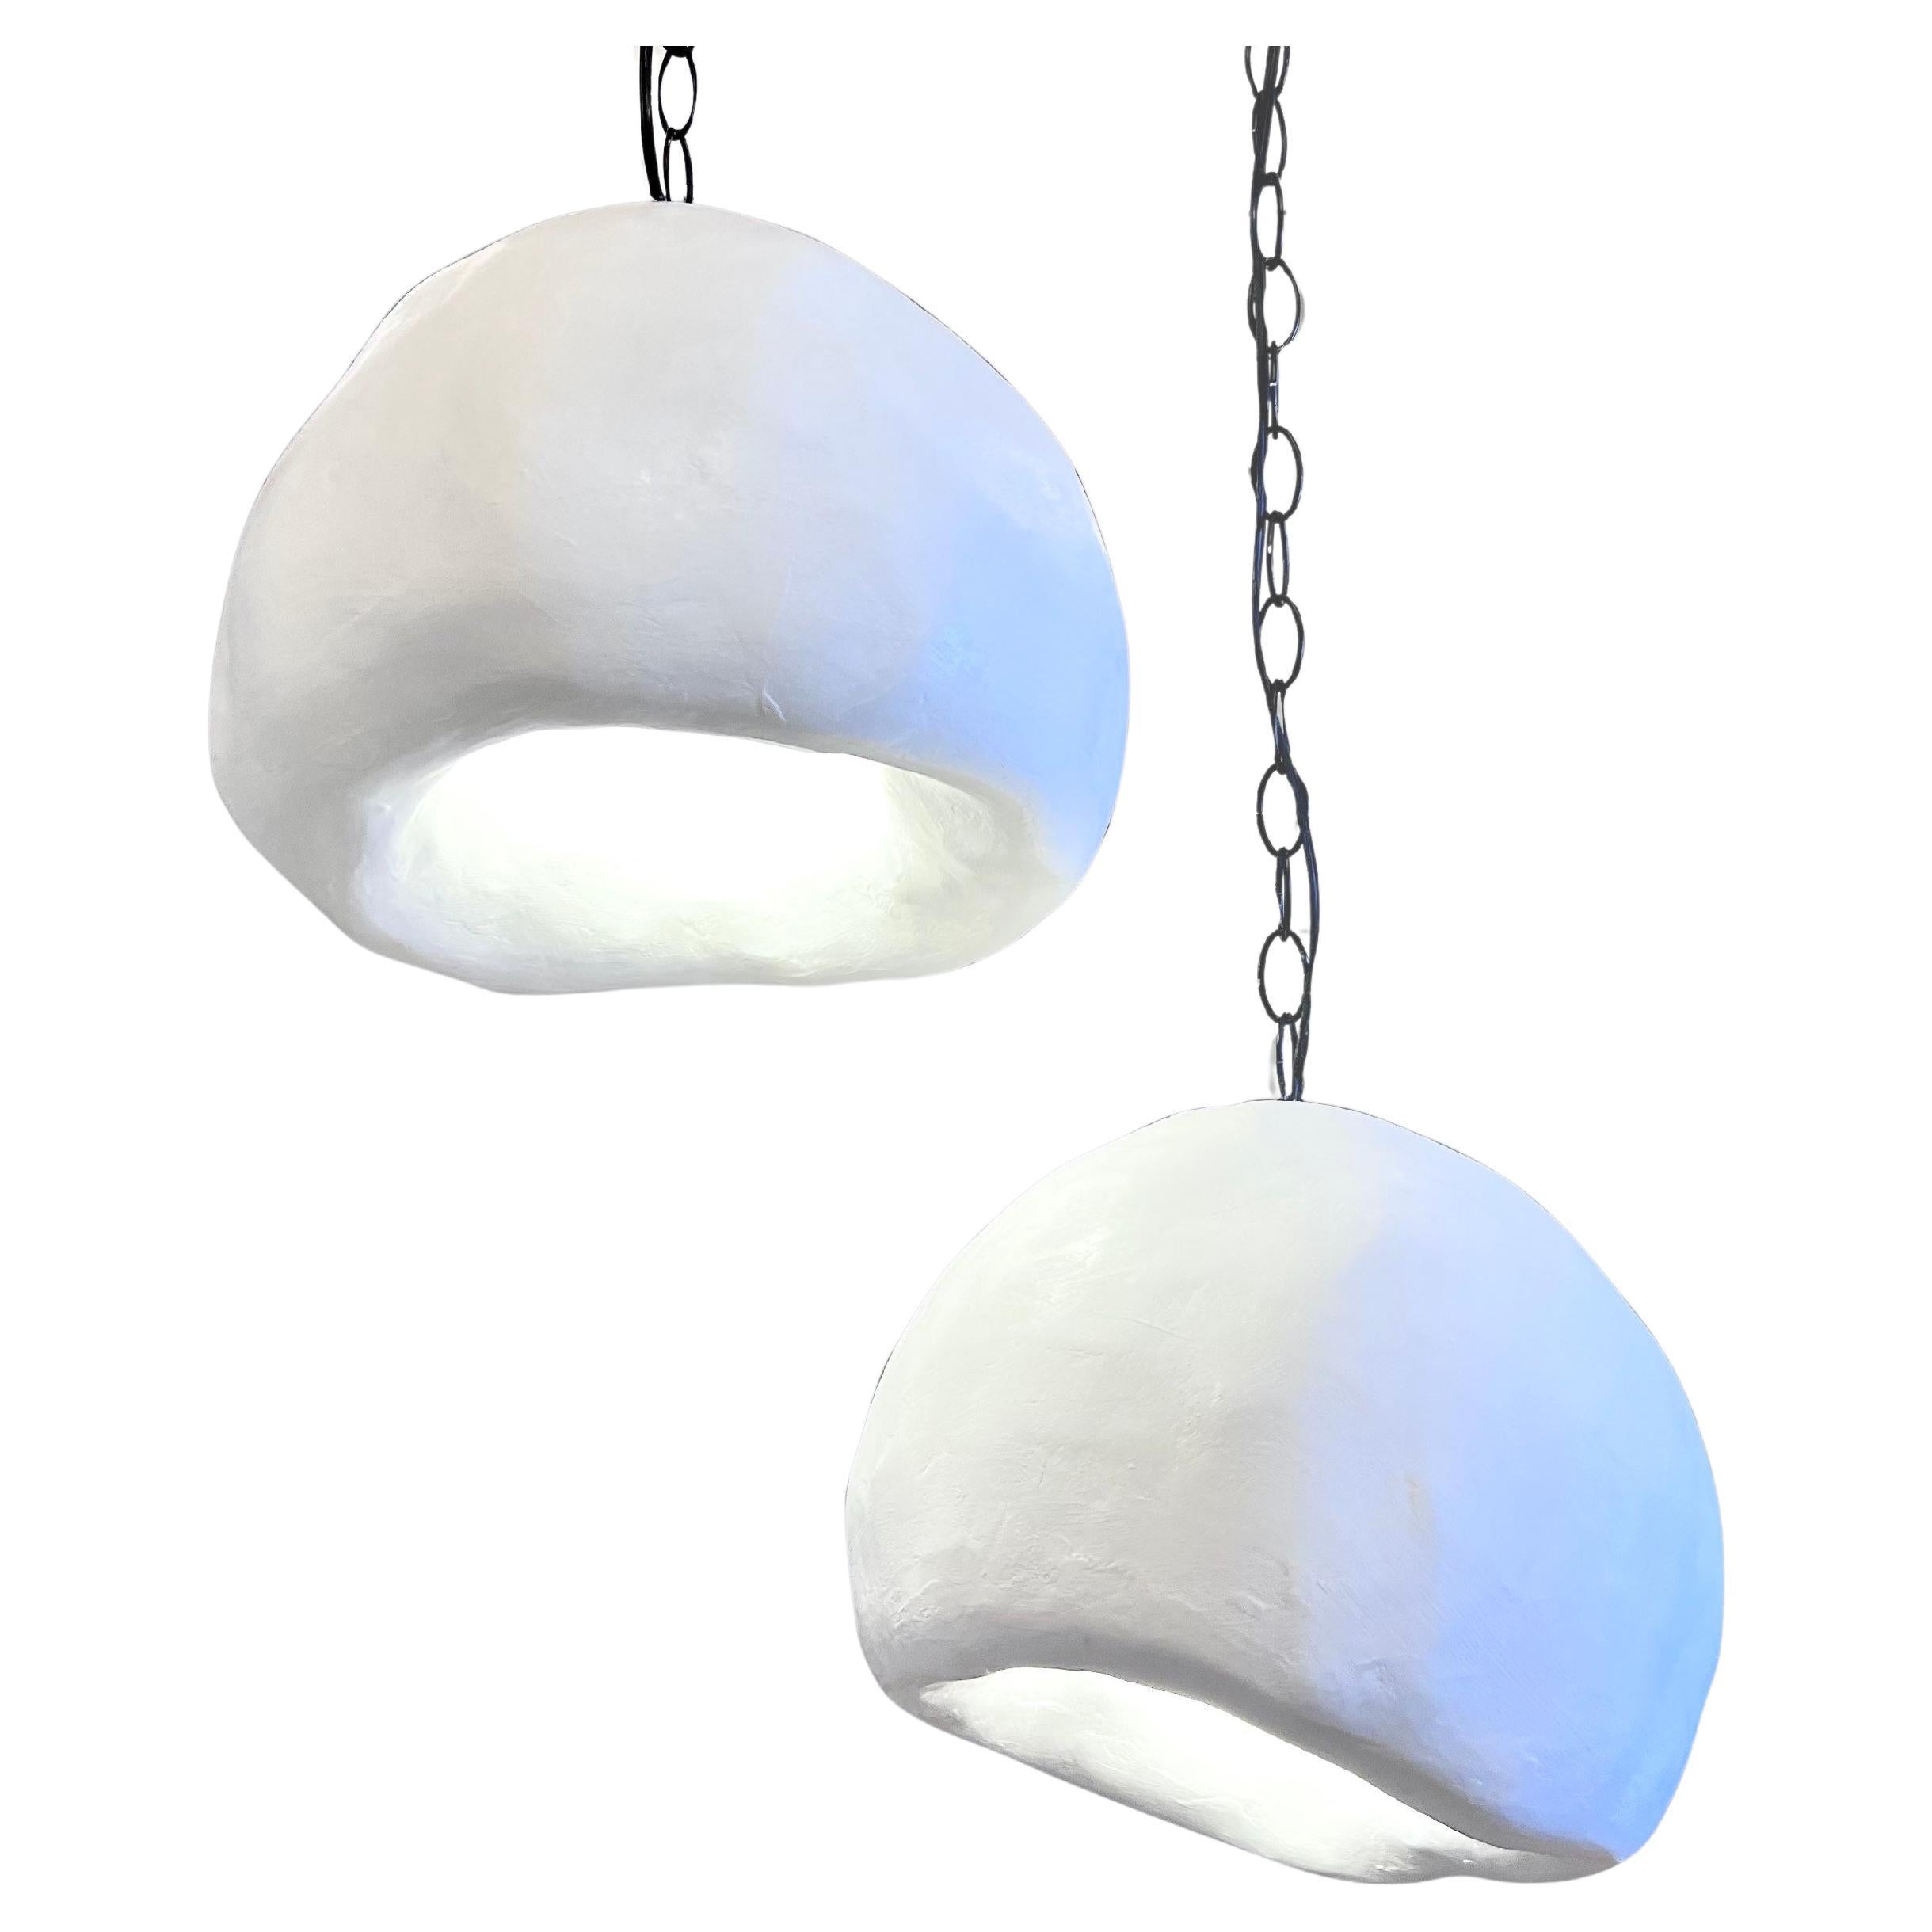 Biomorphic Pendant by Studio Chora, Organic Hanging Light Fixture, Made-to-order For Sale